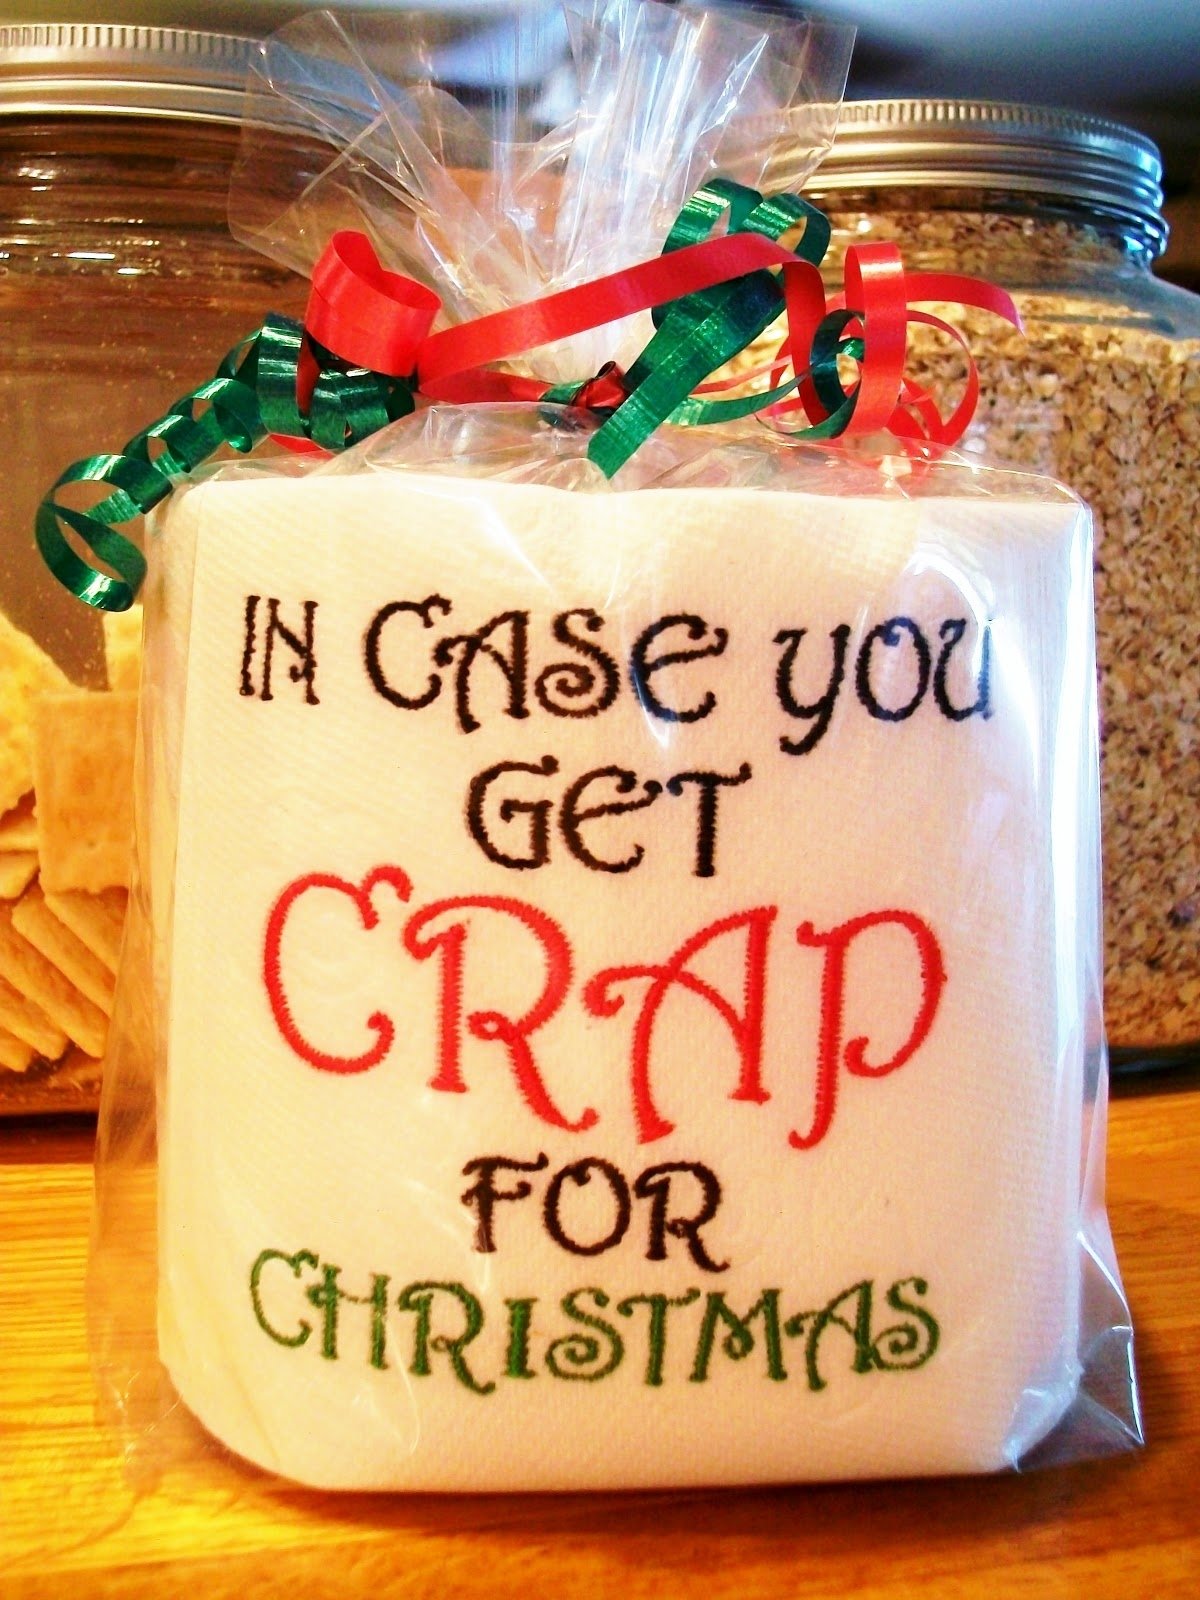 10 Fabulous Homemade White Elephant Gift Ideas funny gag in case you get crap for christmas useful and funny 5 2022